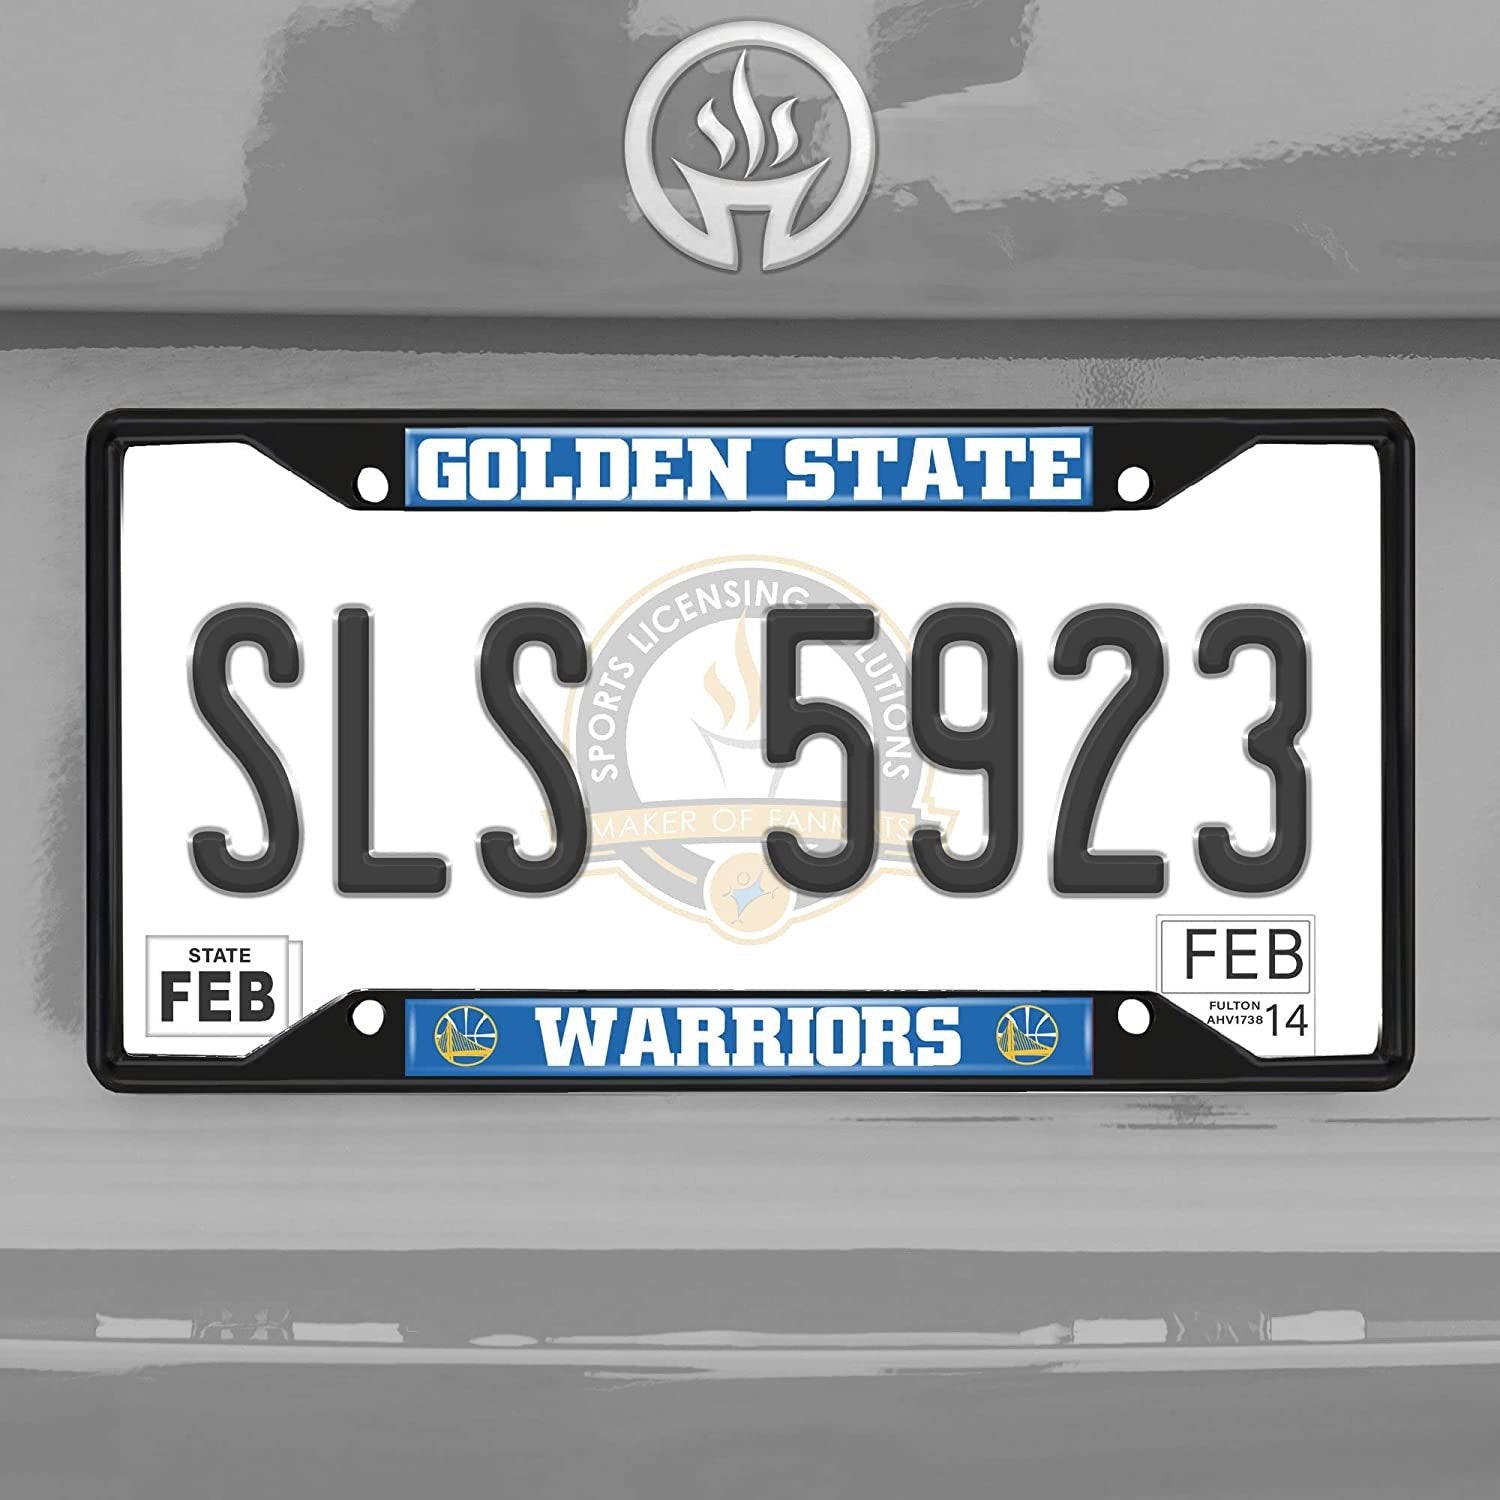 Golden State Warriors Black Metal License Plate Frame Tag Cover, 6x12 Inch